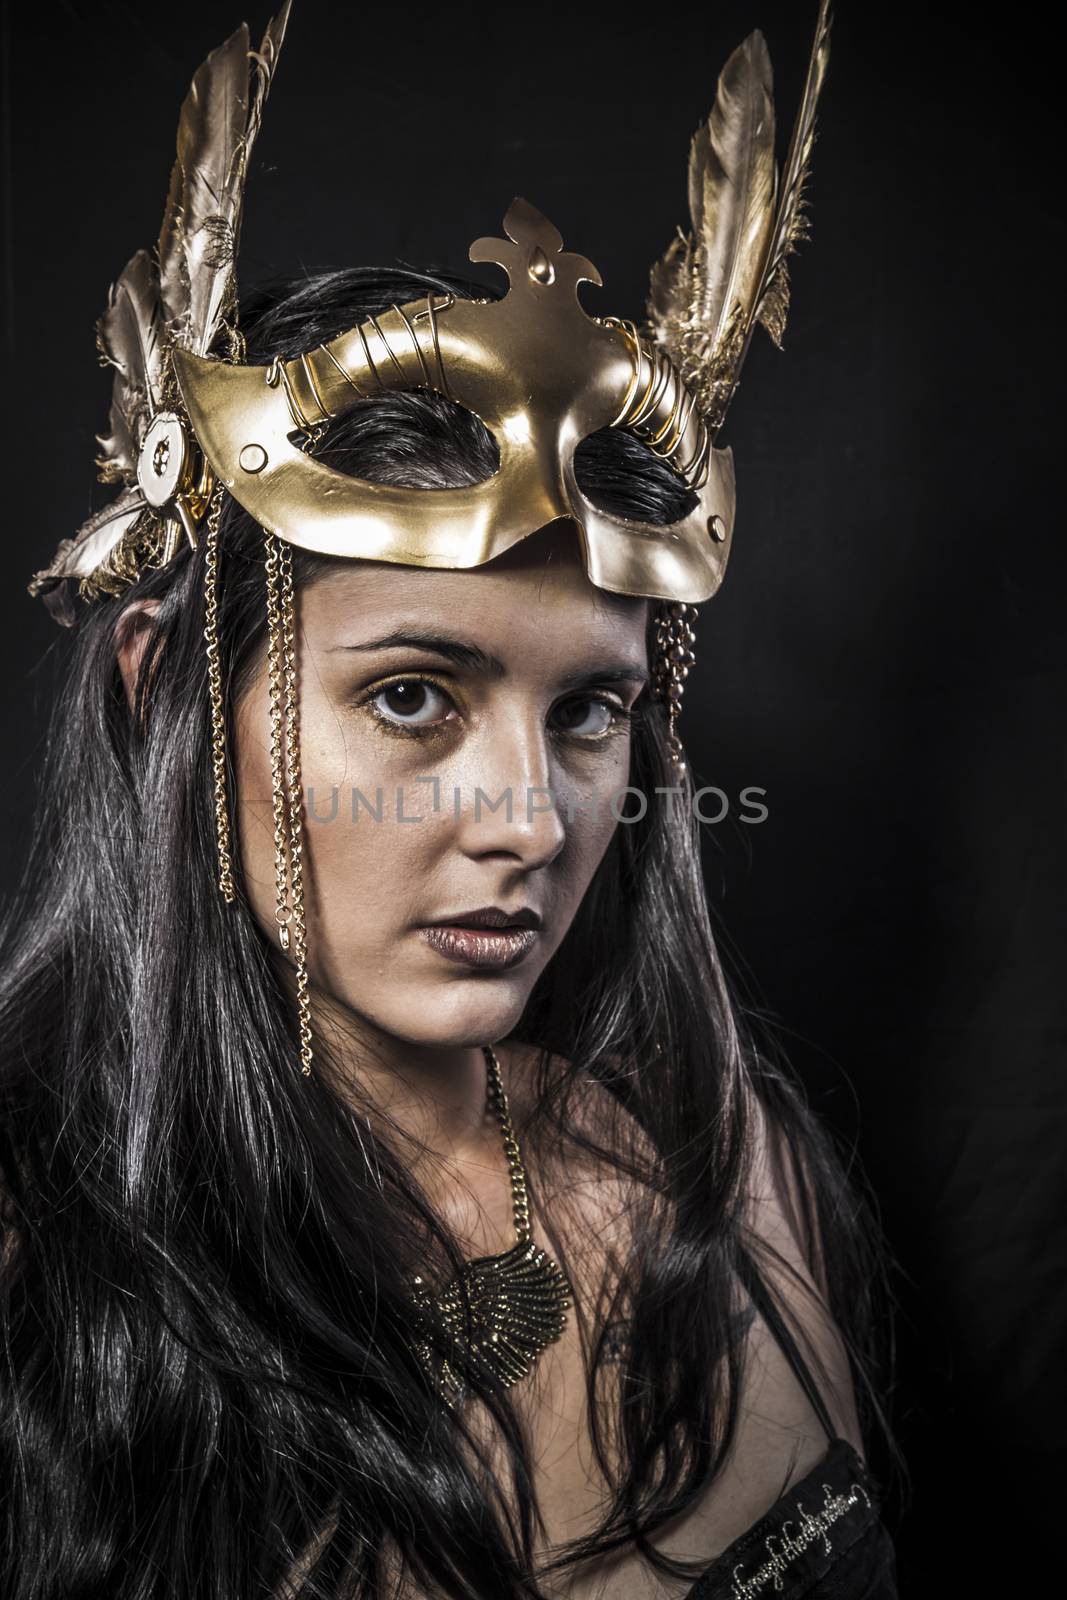 Sensual young woman with golden mask jewelry